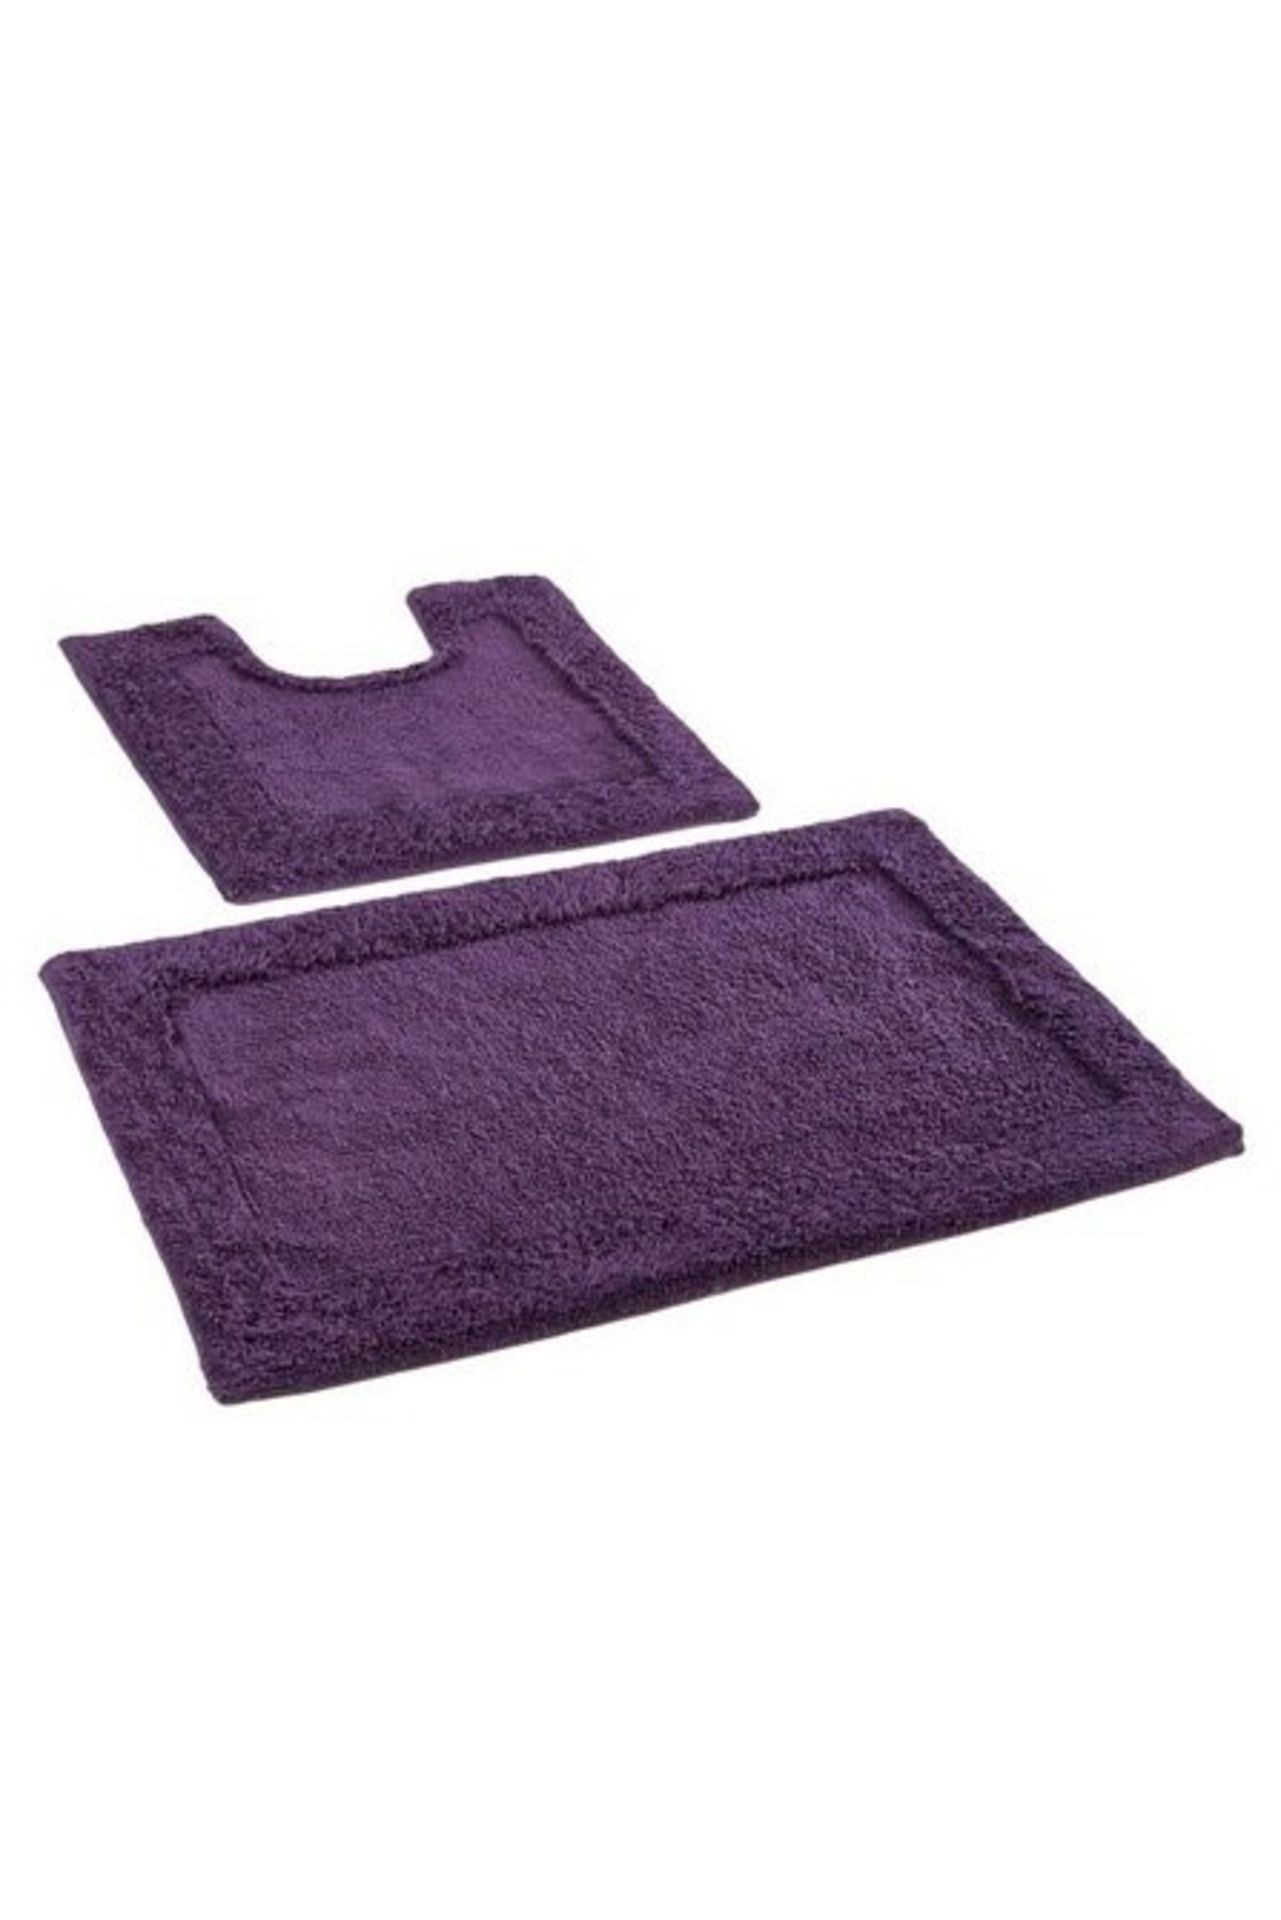 1 AS NEW BAGGED KINGSLEY 2 PIECE BATH MAT SET IN PLUM (PUBLIC VIEWING AVAILABLE)